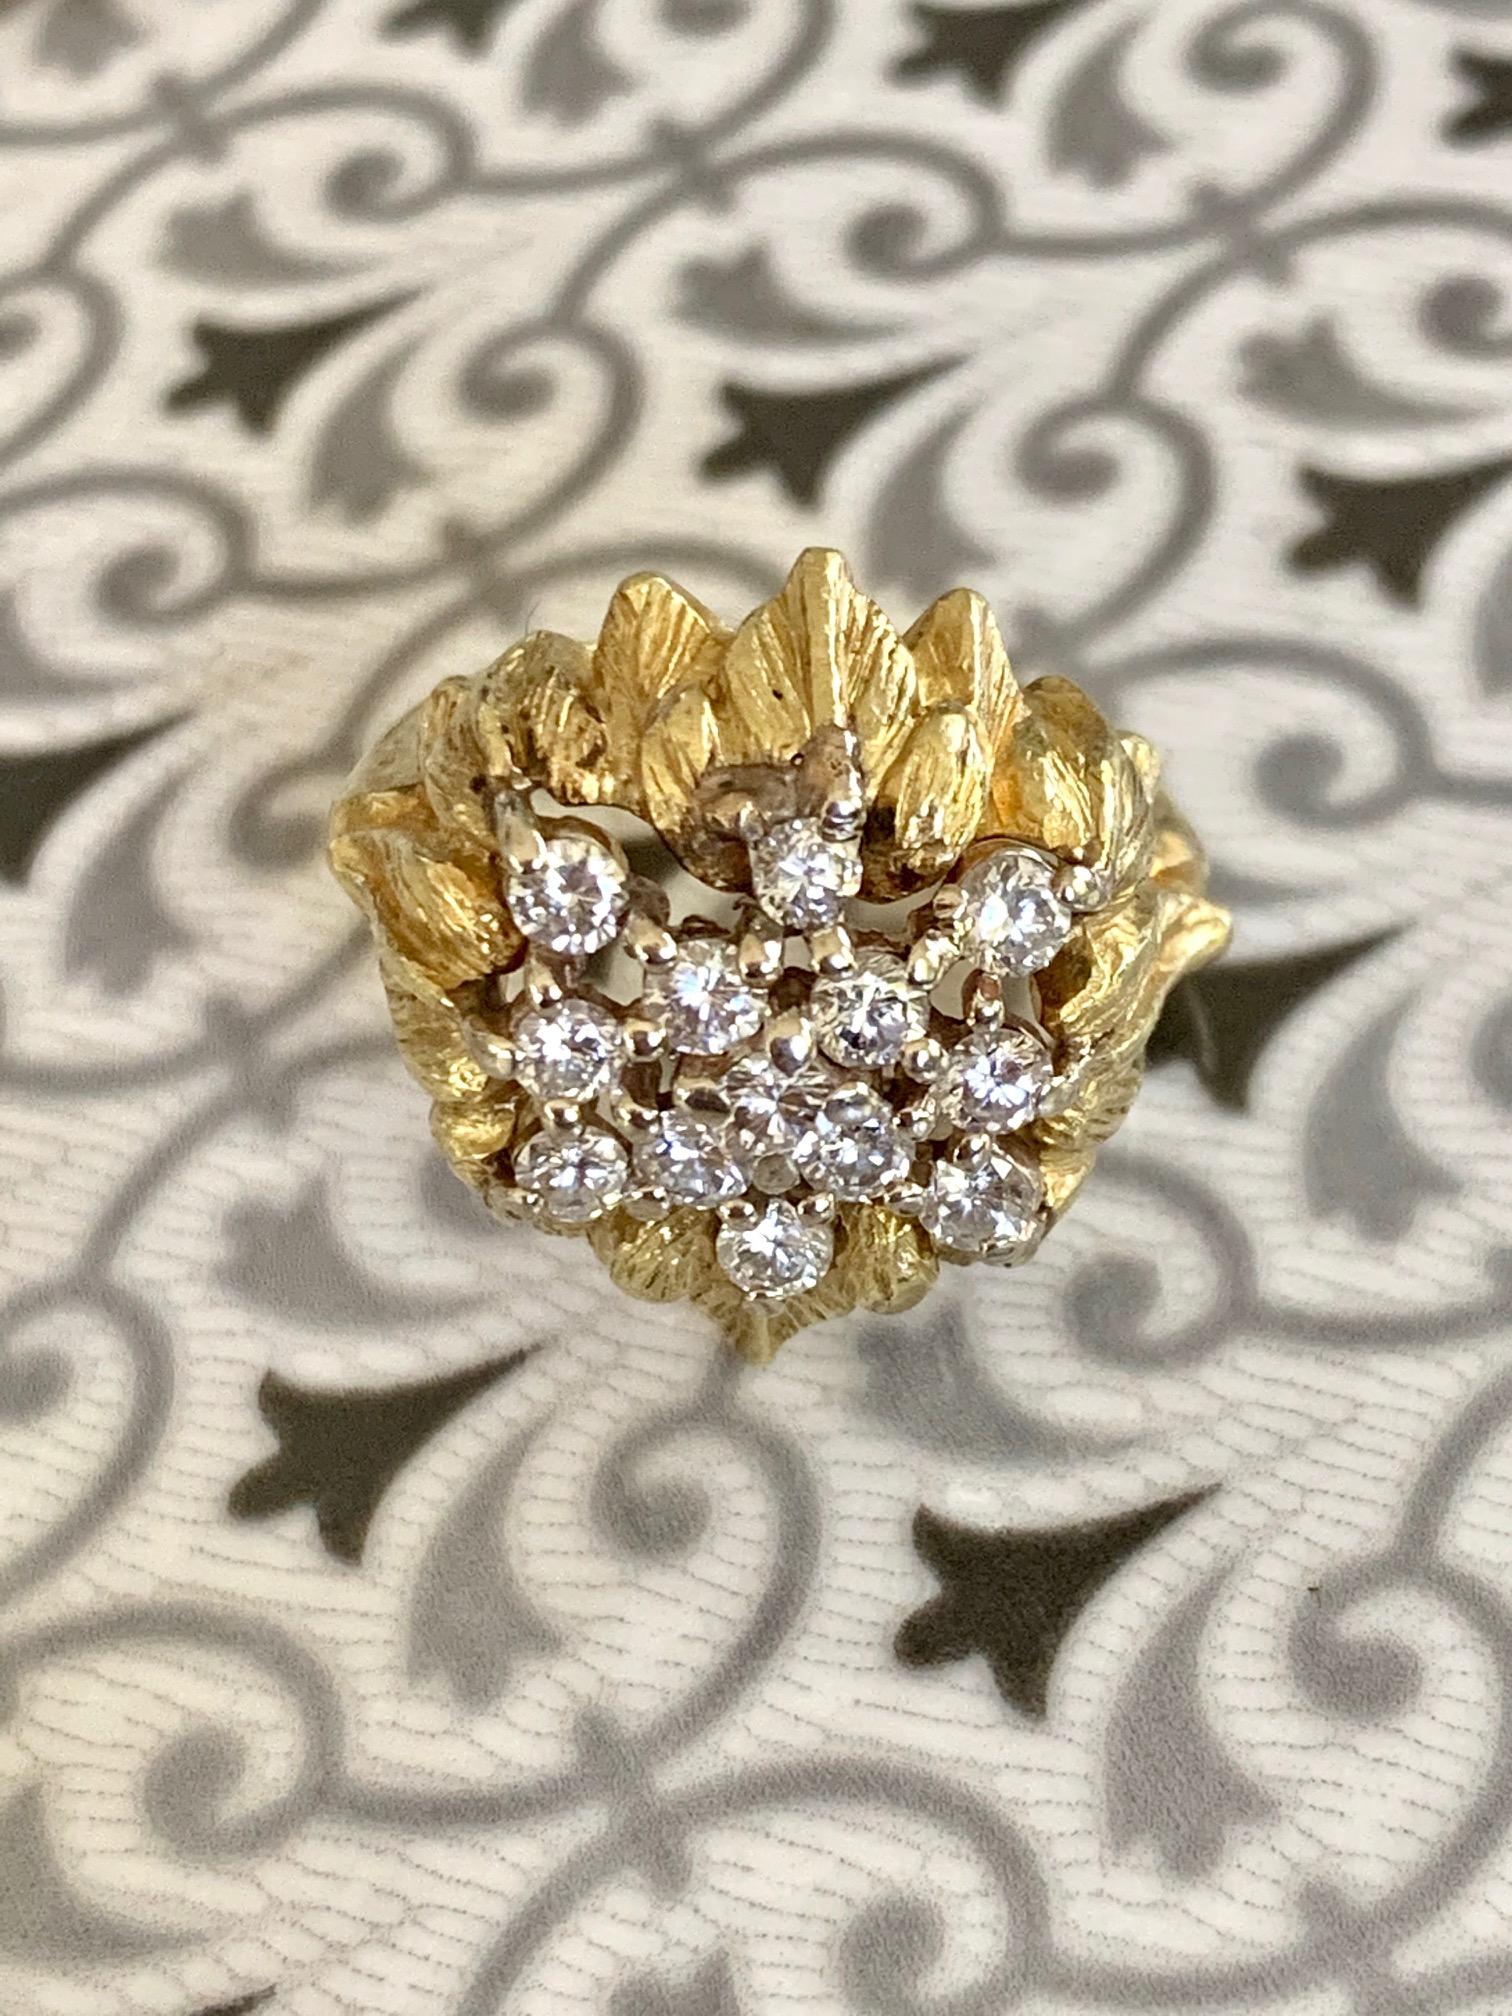 This gorgeous 18 karat yellow Gold ring features 13 brilliant cut Diamonds, totaling approximately 1.4ctw.
Average grade: VS-G/H

Size: 7 - this ring is resizable but vendor does not offer sizing services. 
Weight: 13.8 grams 